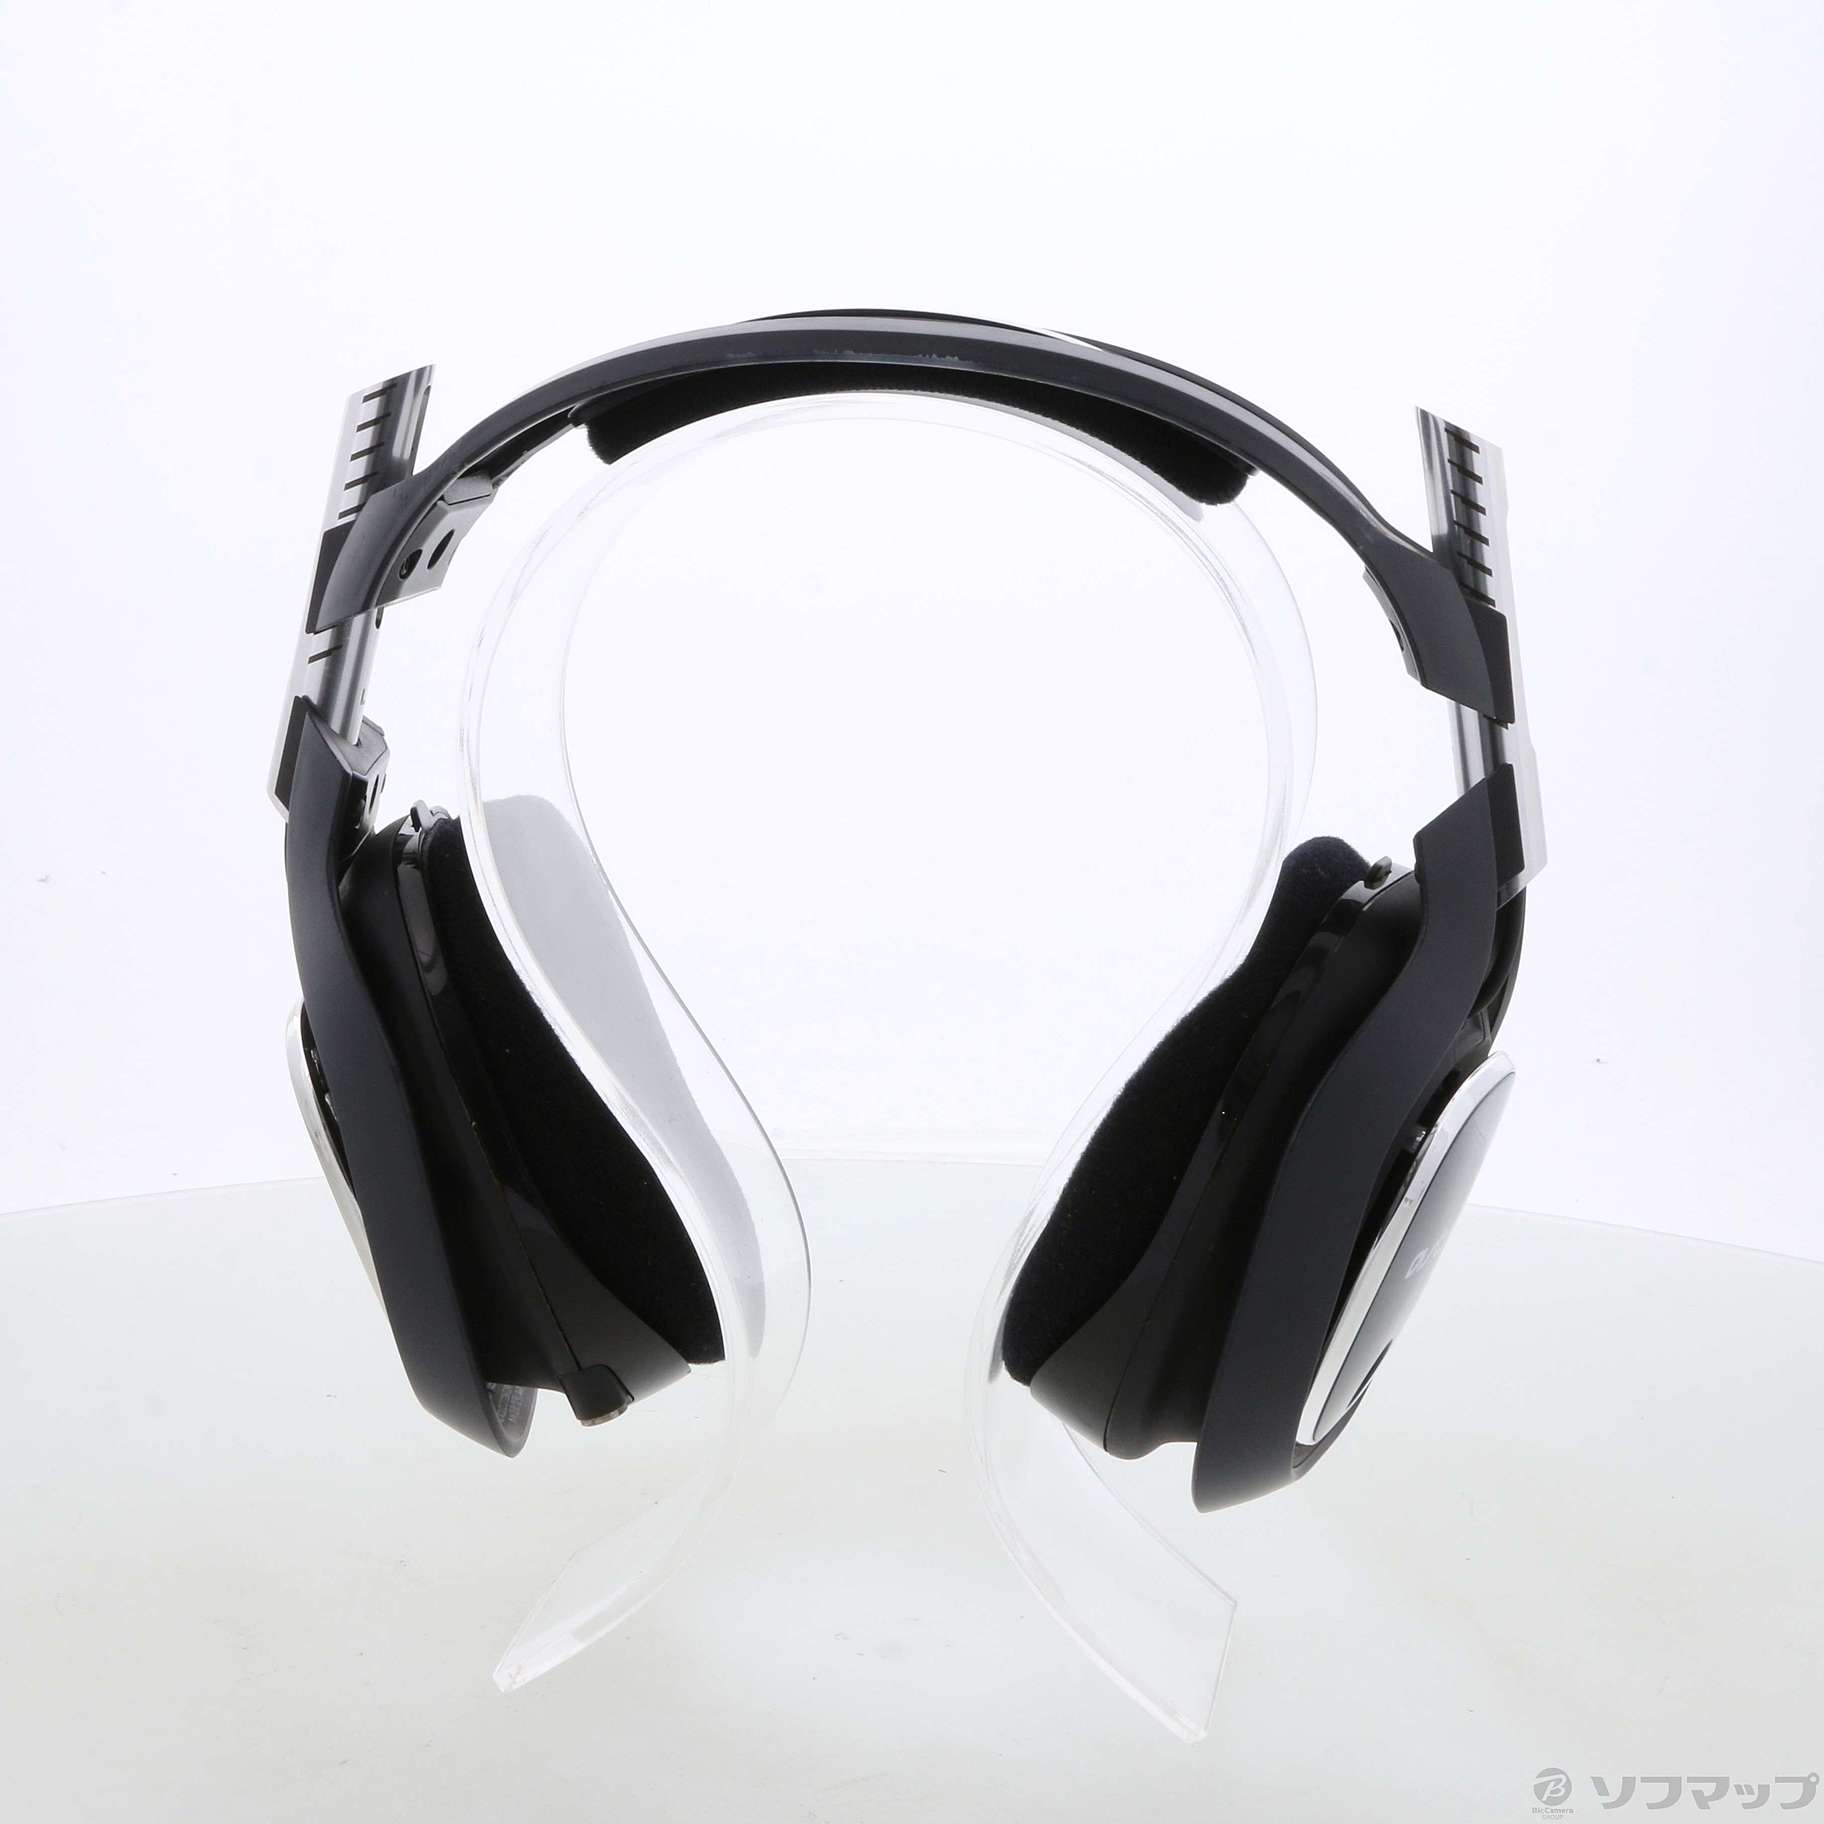 ASTRO A40 TR ゲーミングヘッドセット A40TR-002